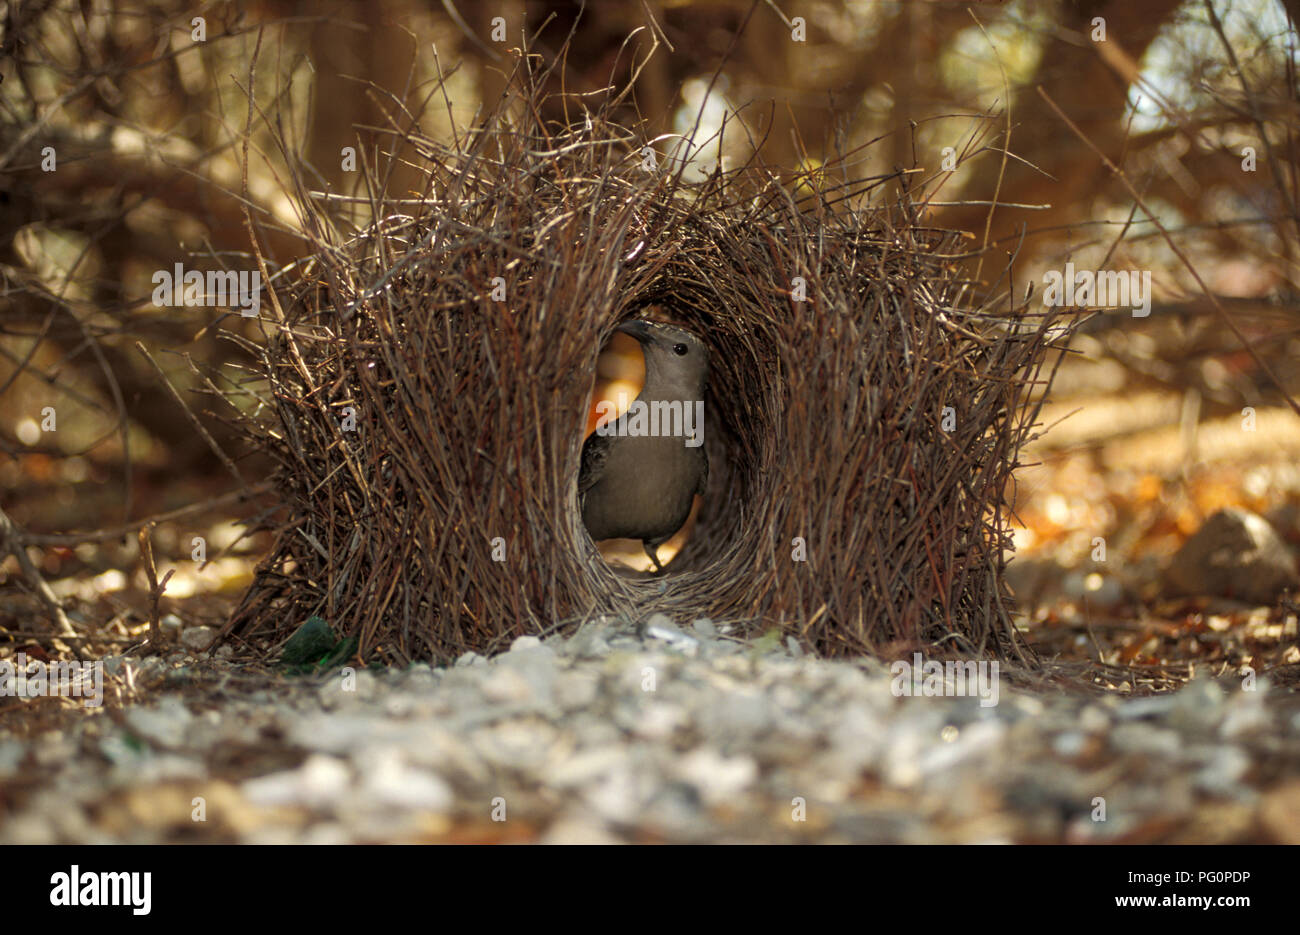 The Greater Bowerbird (Chlamydera nuchalis) is a common resident of Northern Australia. Seen here inside it’s bower. Stock Photo